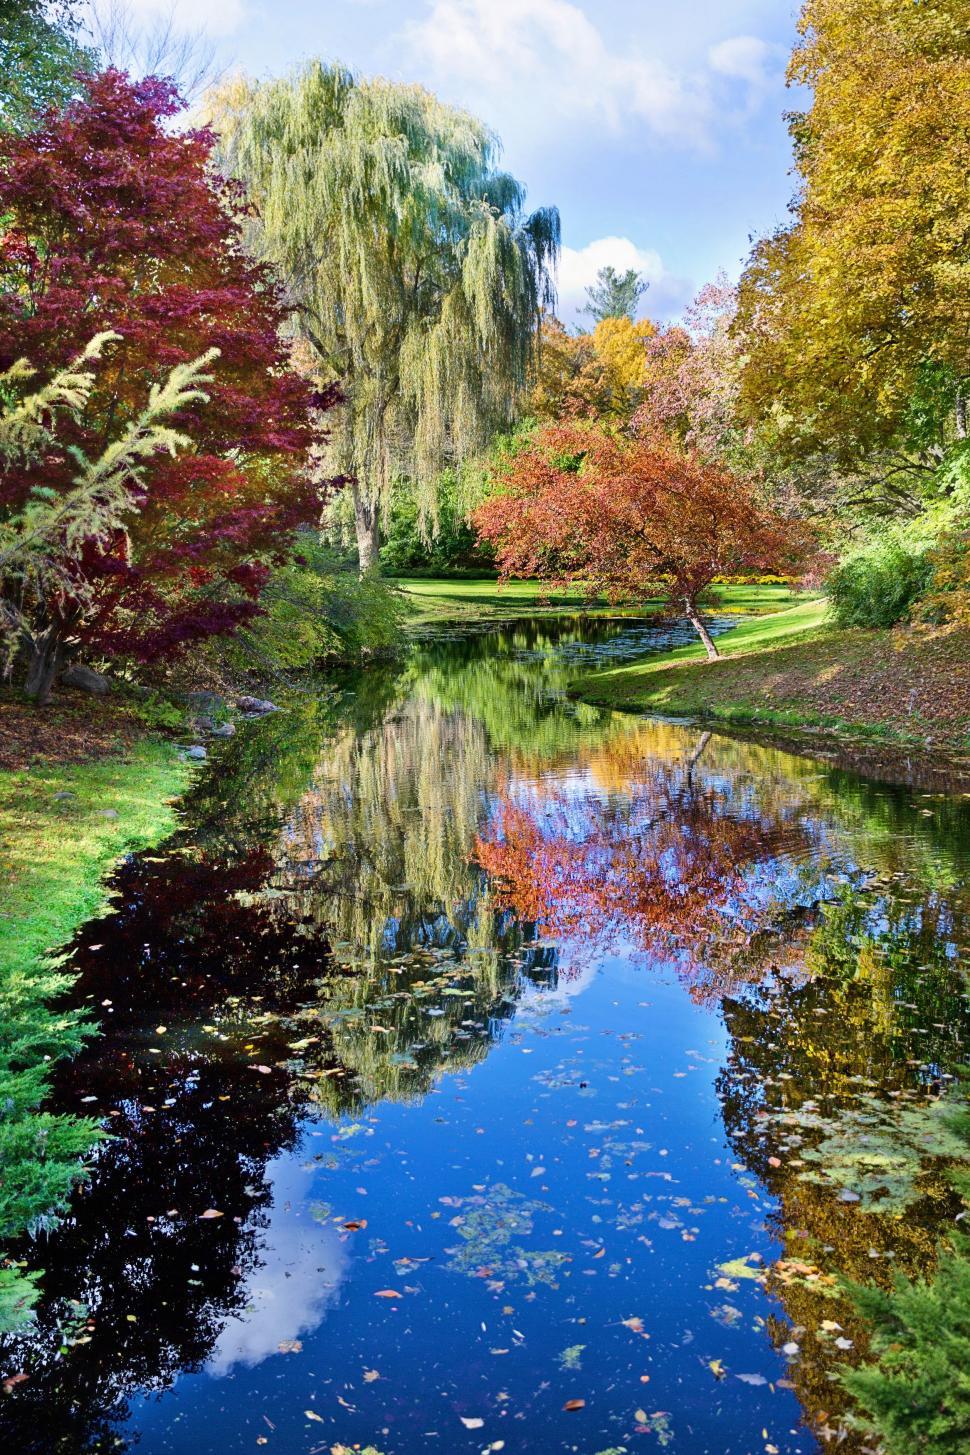 Free Image of Autumn Trees and Pond in Park  